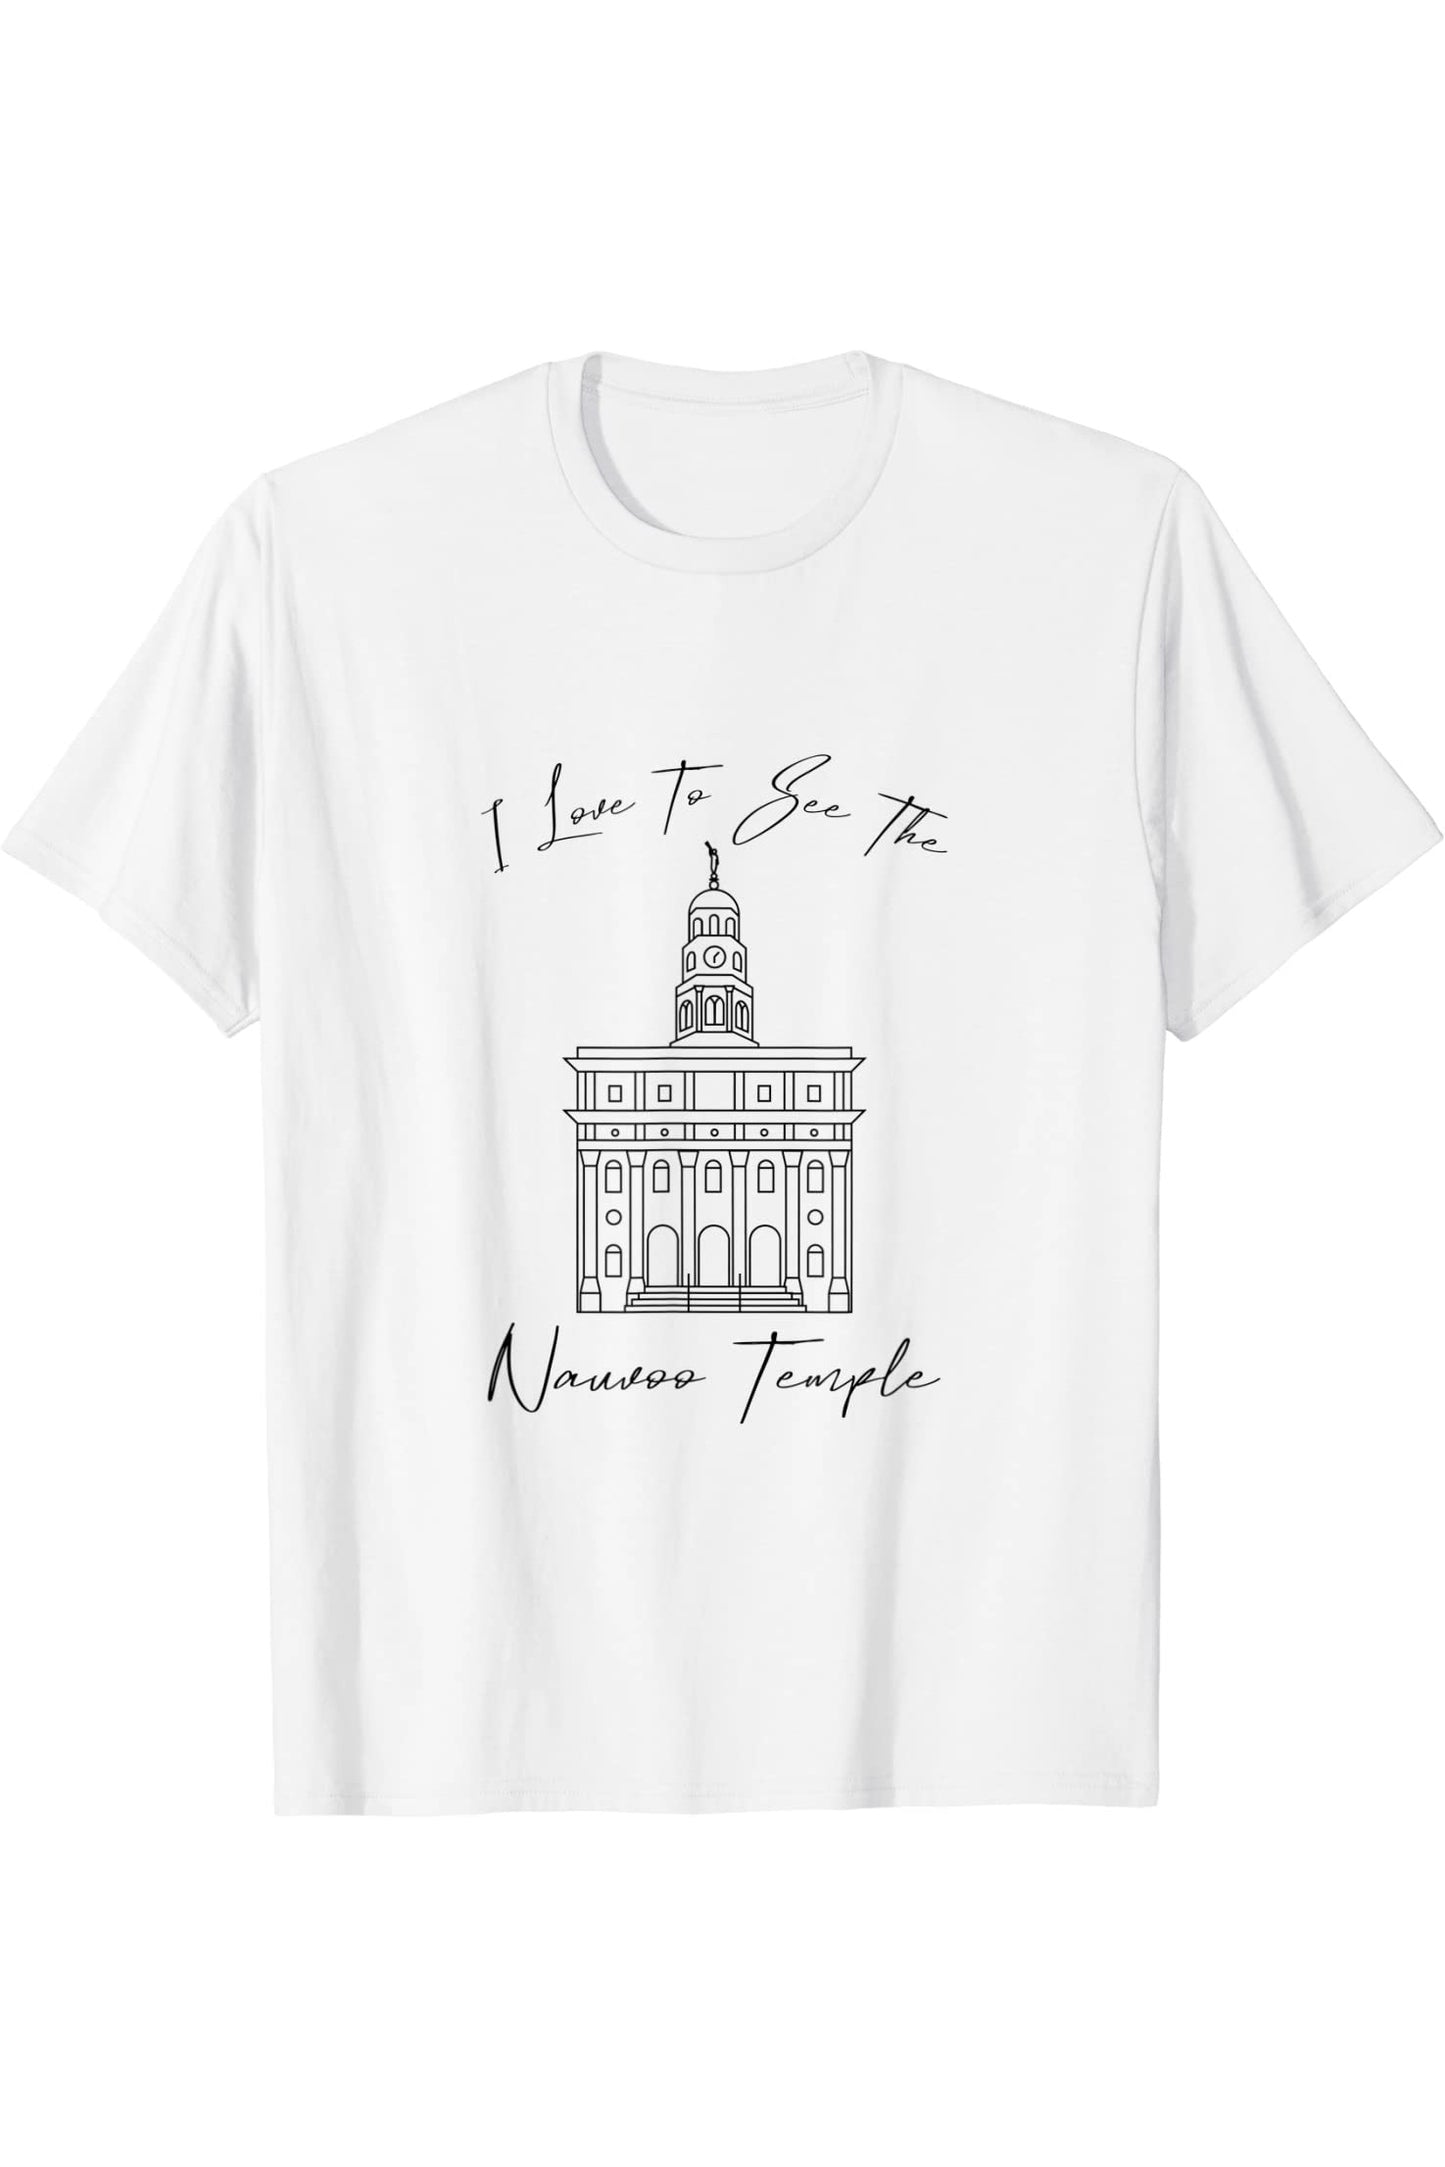 Nauvoo IL Temple, I love to see my temple カリグラフィー T-Shirt